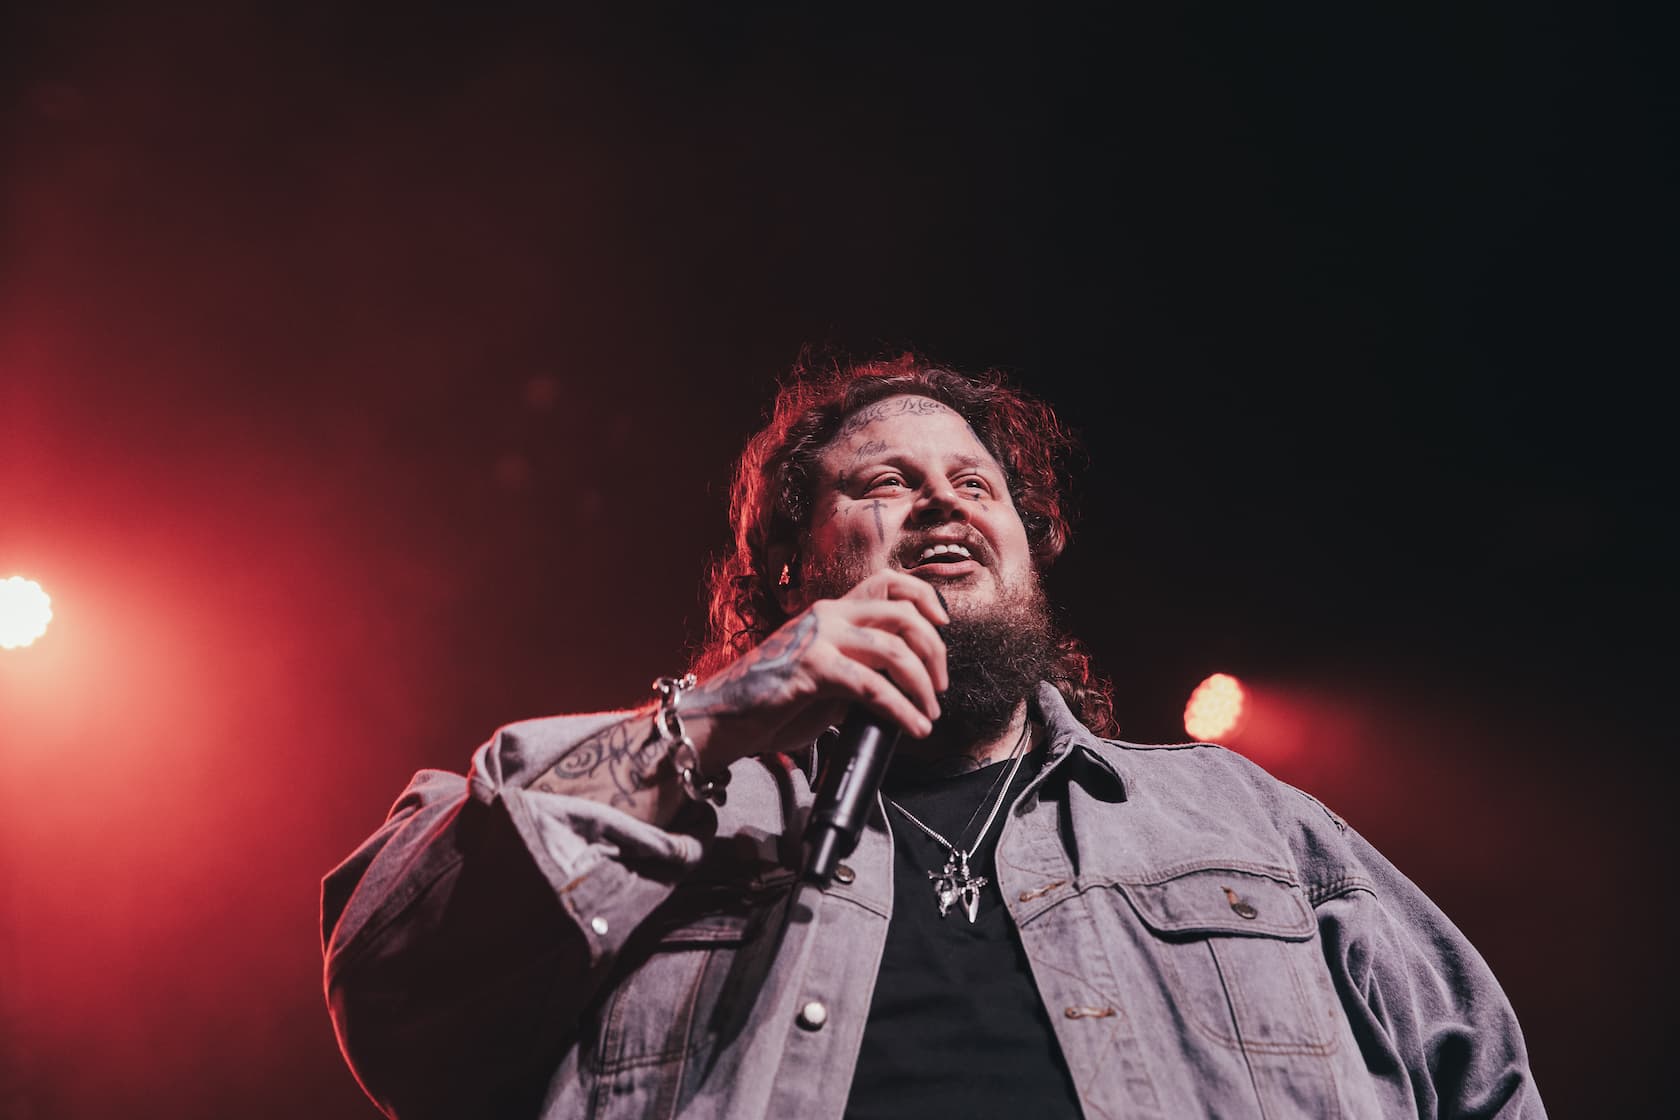 Jelly Roll Joins Wallen as Headlining Act for Gulf Coast Jam